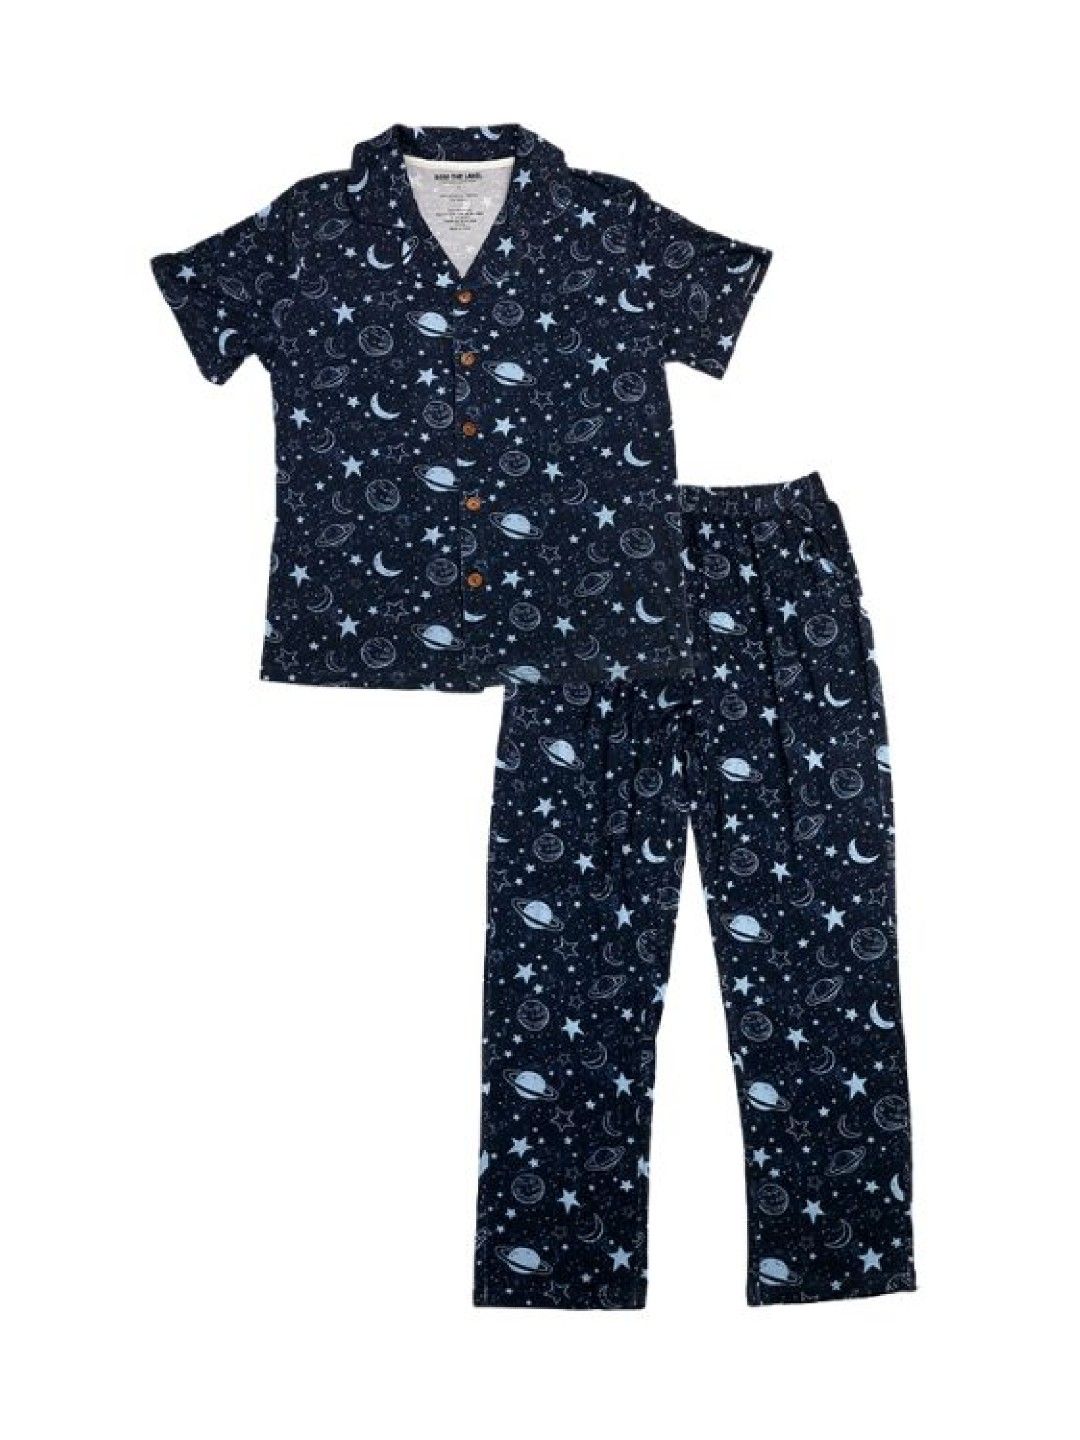 Bear The Label Harper - Bamboo Adult Short Sleeved Shirt And Pants Set In Night Sky